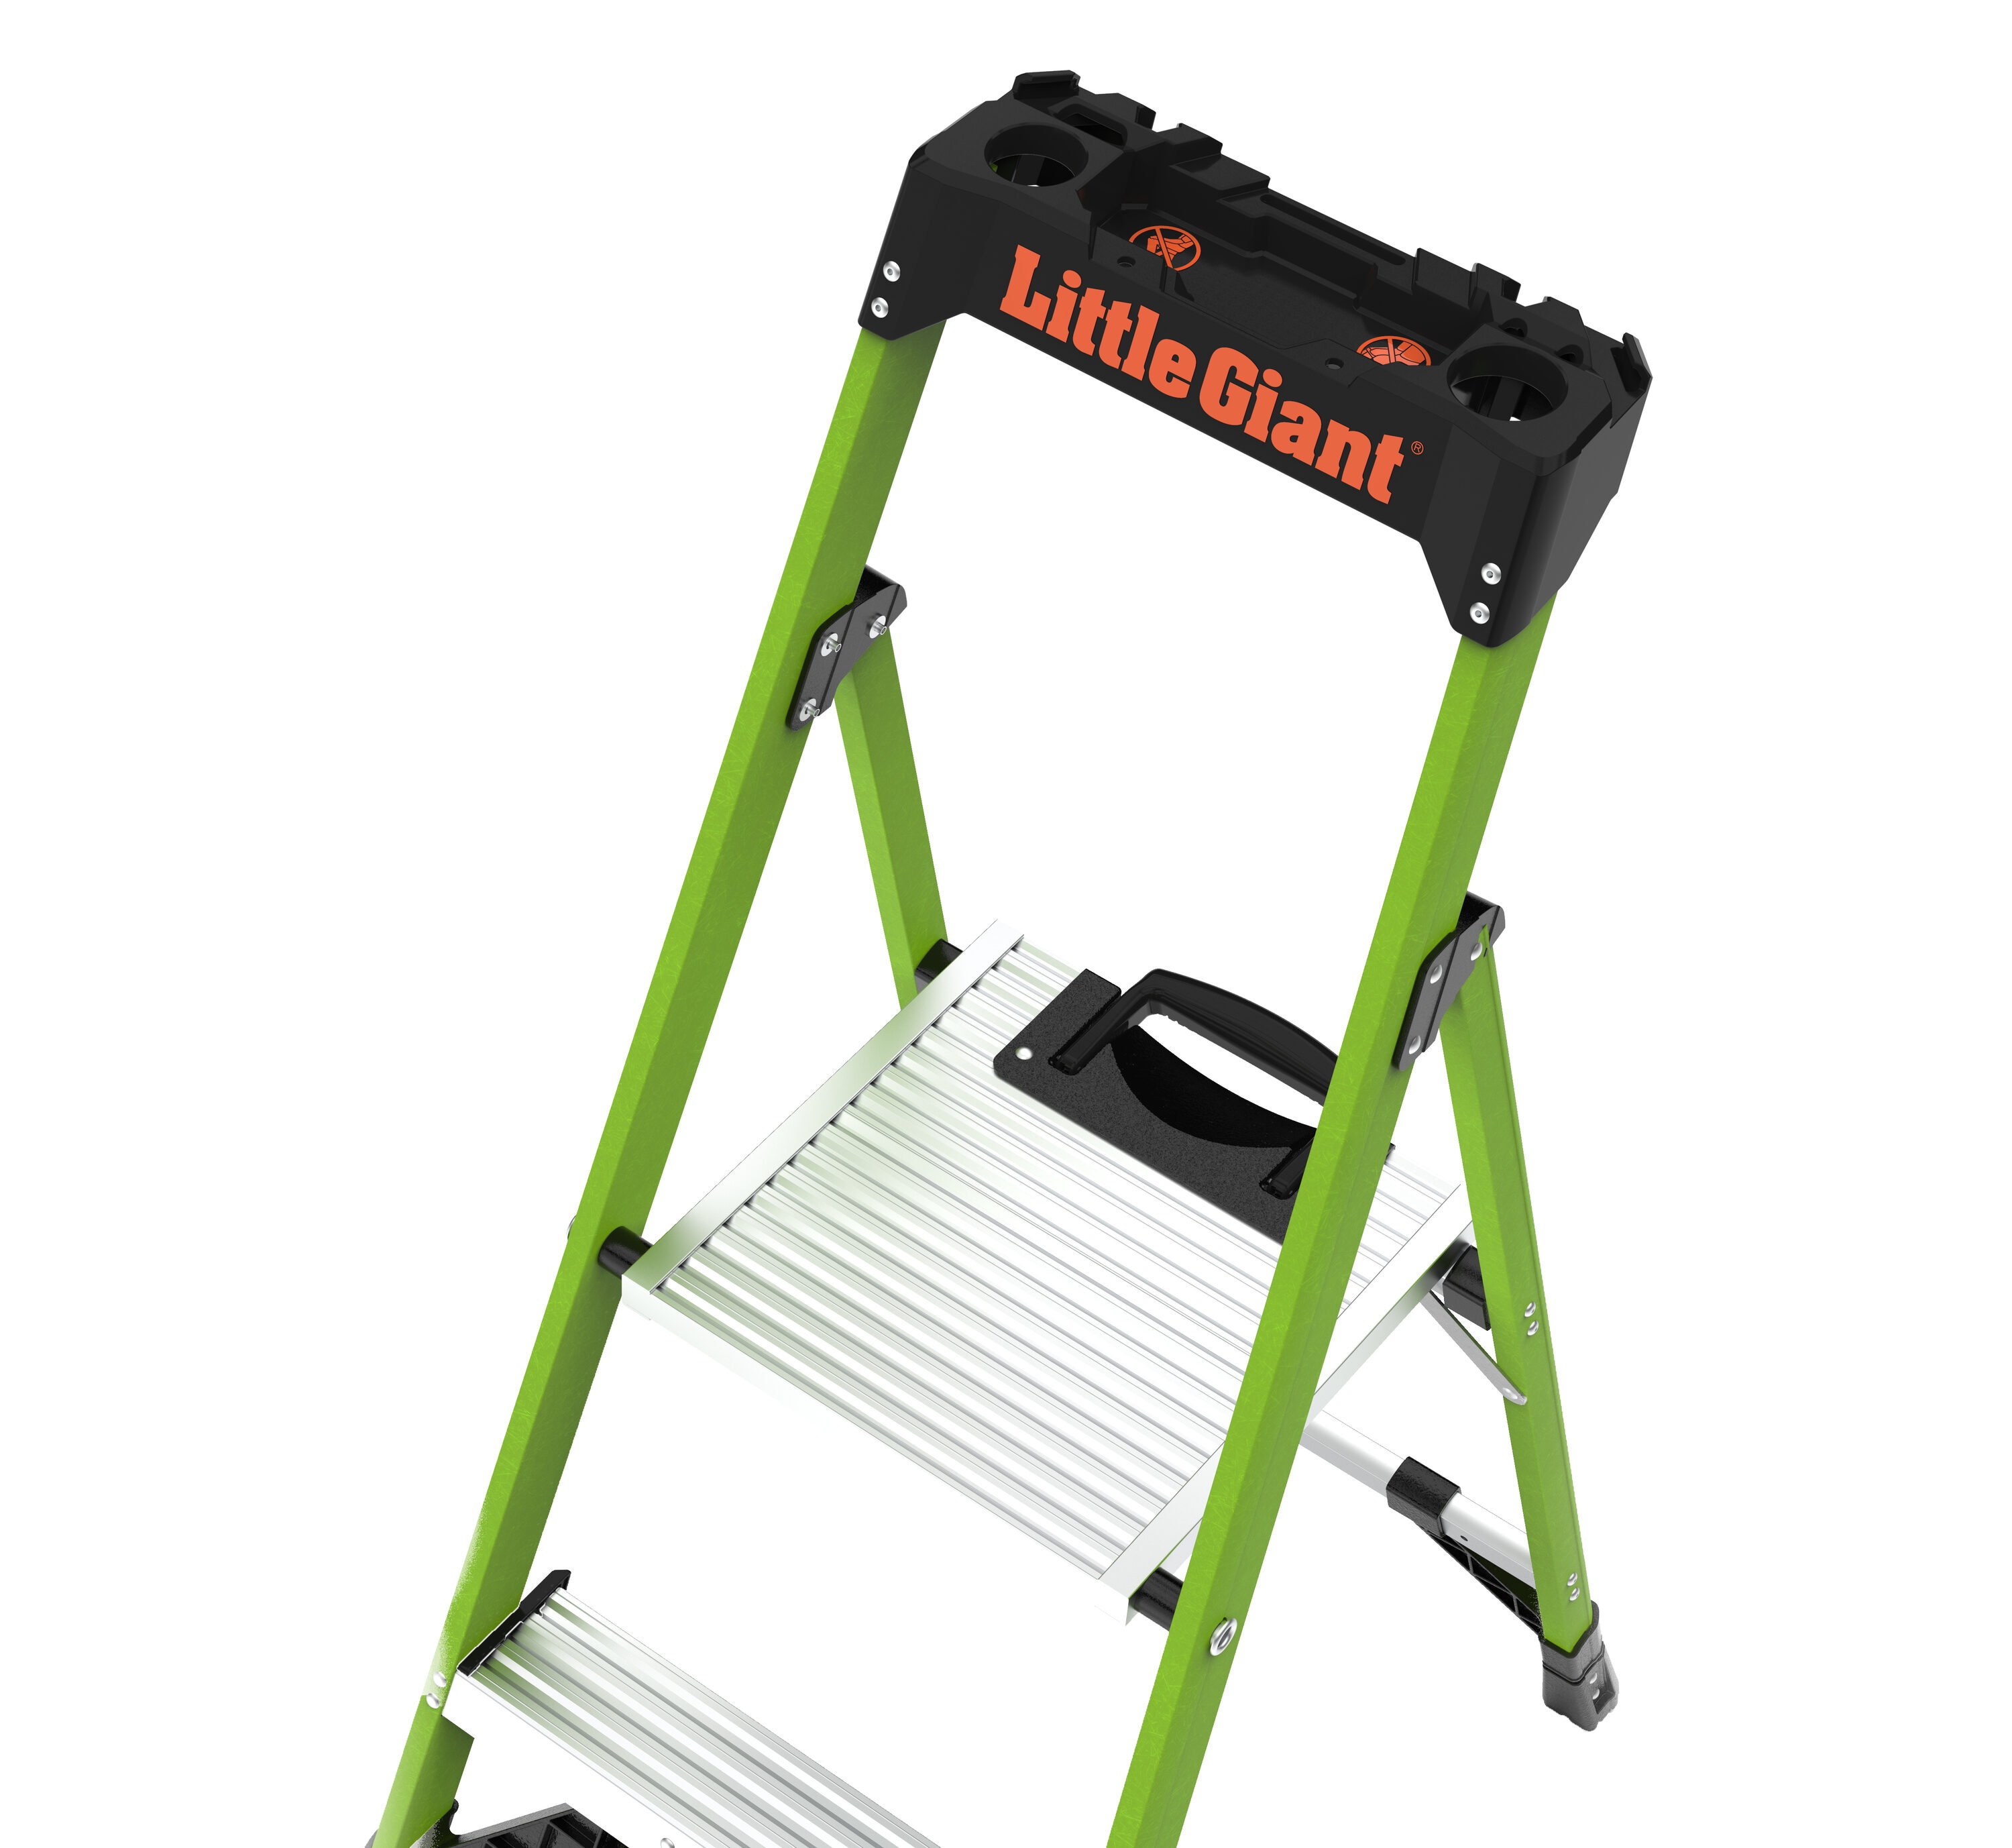 Little Giant Ladders MightyLite M4 4-ft Fiberglass Type 1a- 300-lb Load  Capacity Platform Step Ladder in the Step Ladders department at